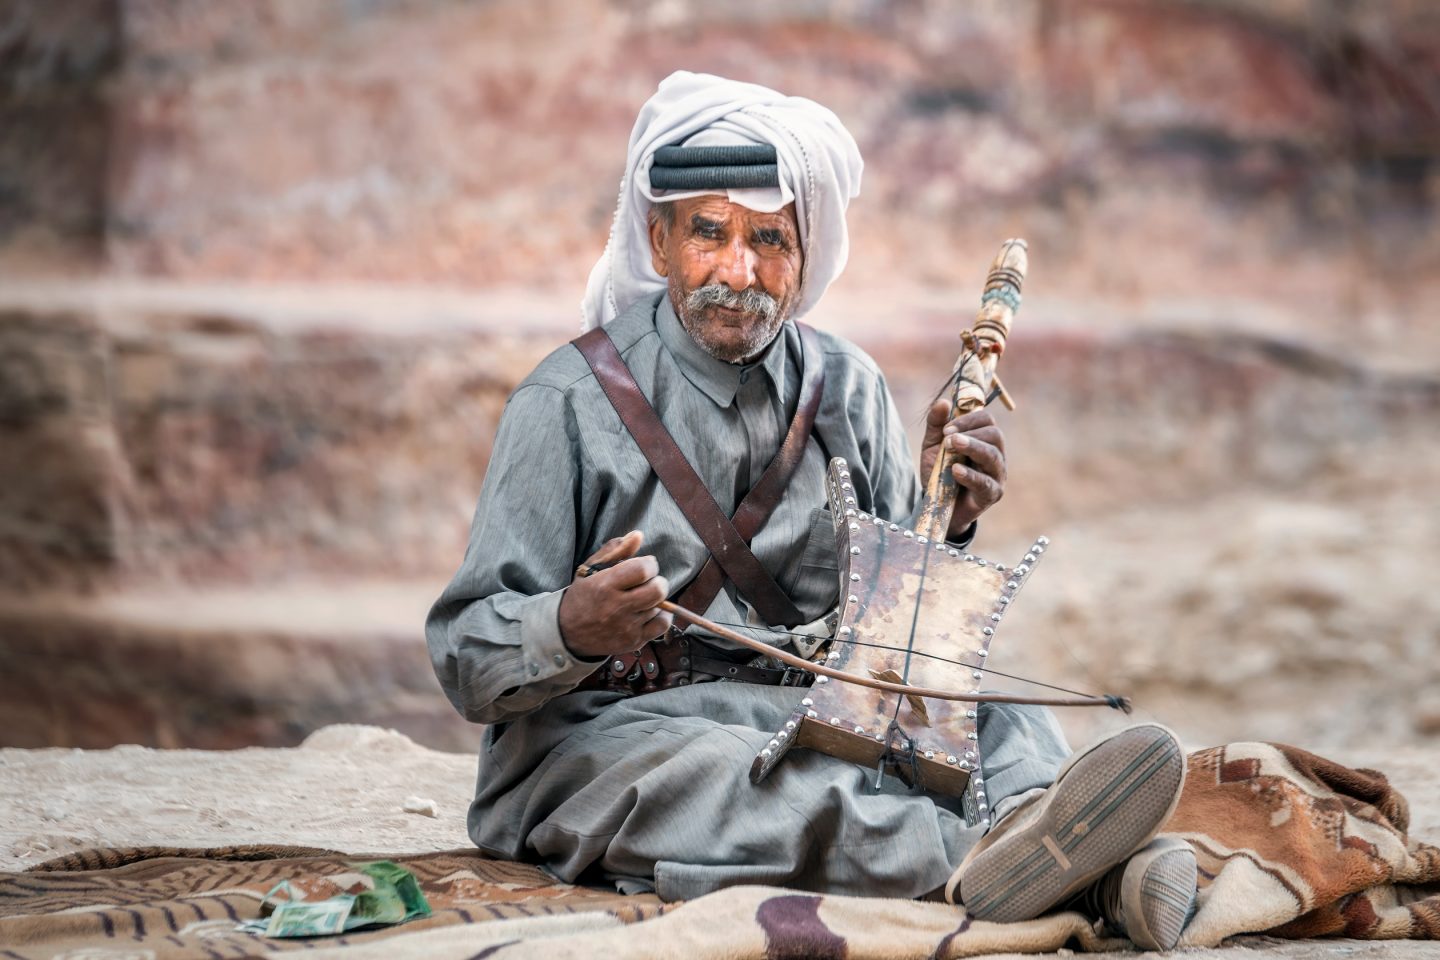 A local Bedouin sitting on the floor with an instrument in Petra, Jordan